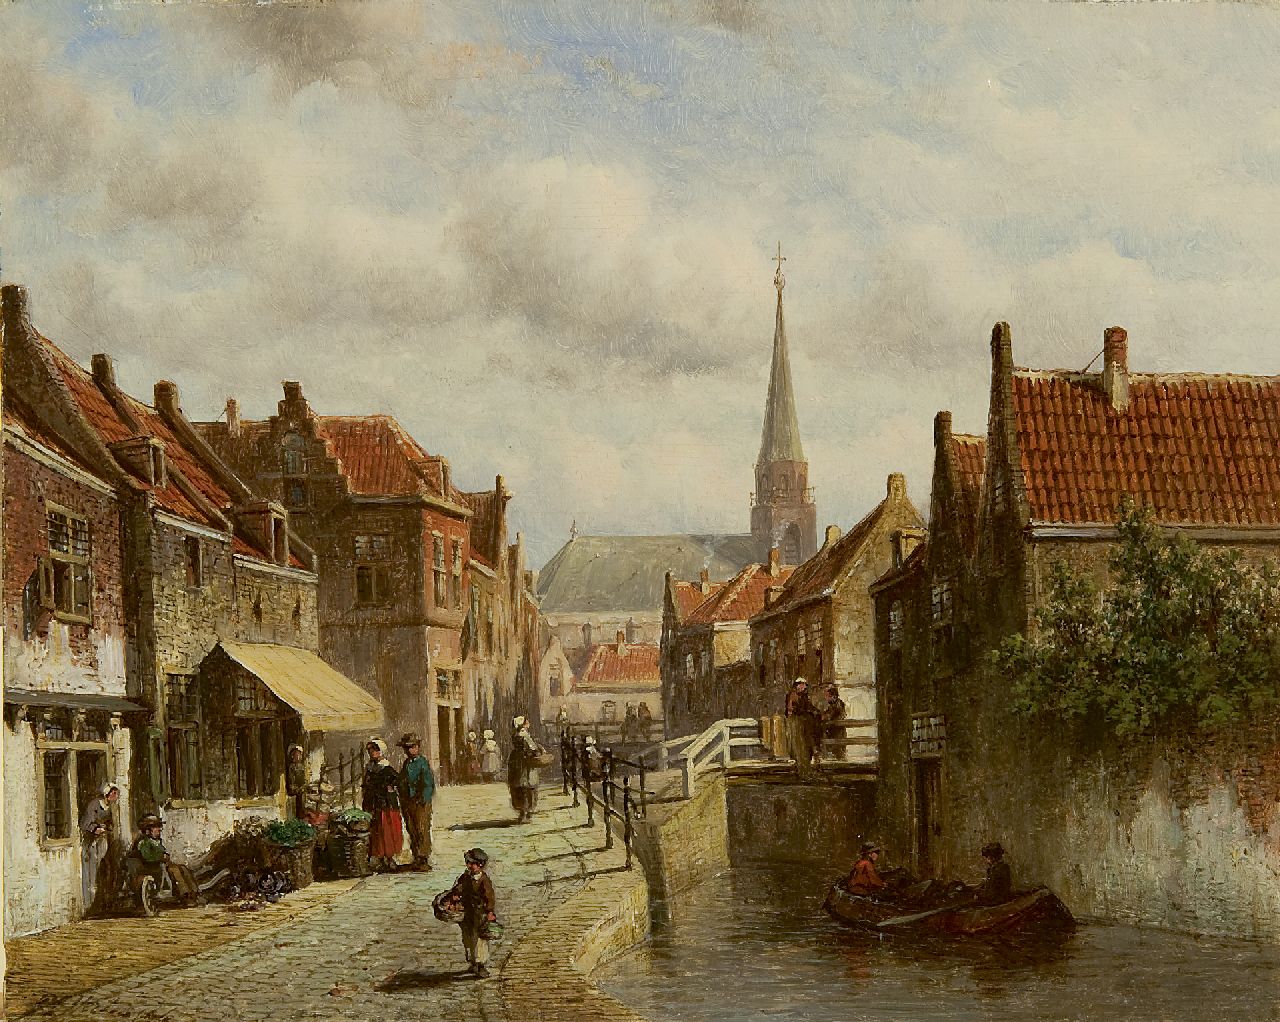 Vertin P.G.  | Petrus Gerardus Vertin, A Dutch village with the tower of the Scheveningen church, oil on panel 23.4 x 29.2 cm, signed l.l. and dated '66